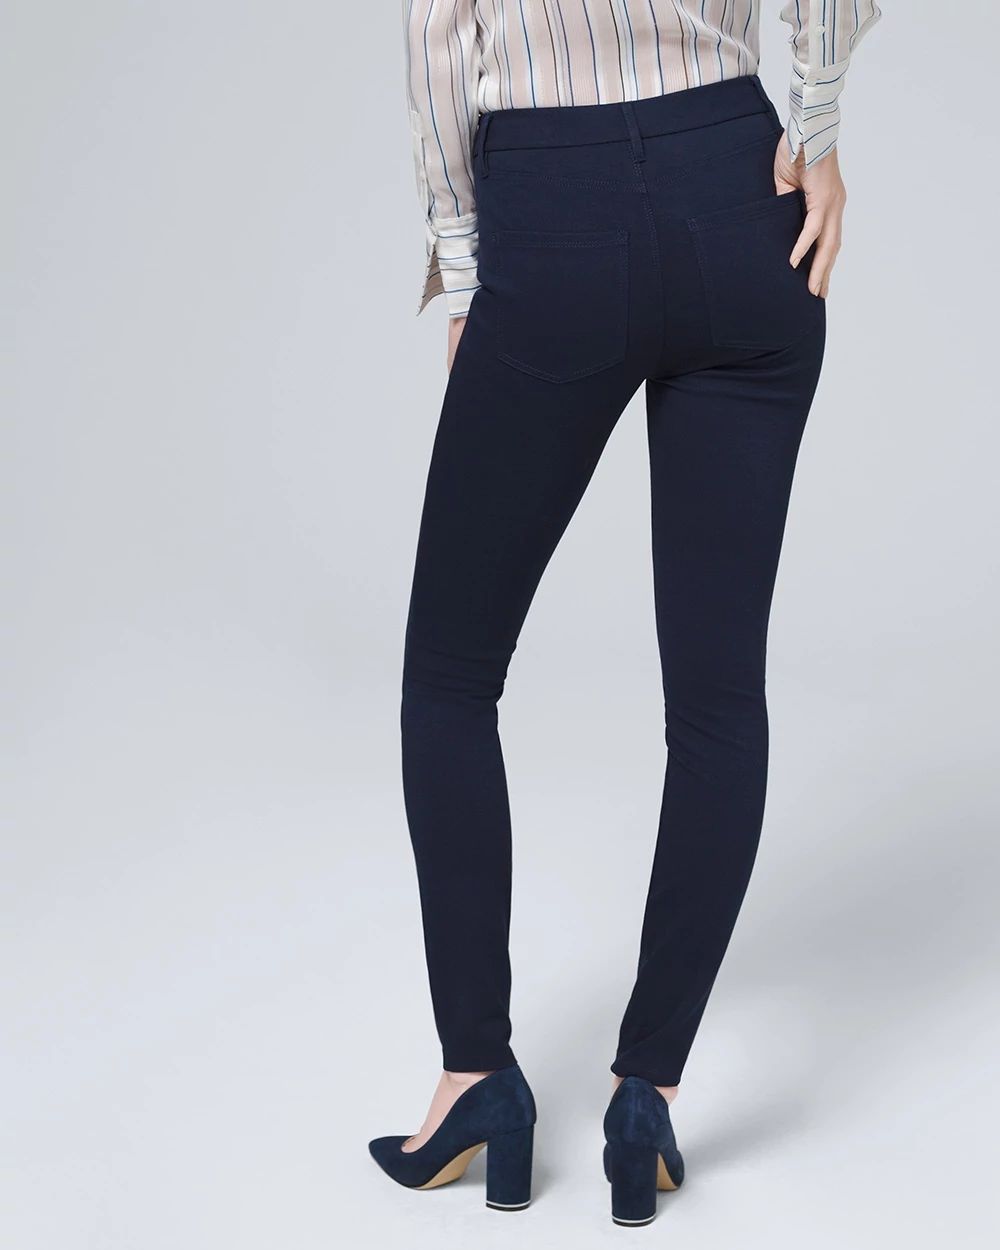 Effortless High-Rise Skinny Ankle Pants with Top Secret Slimming Pockets click to view larger image.